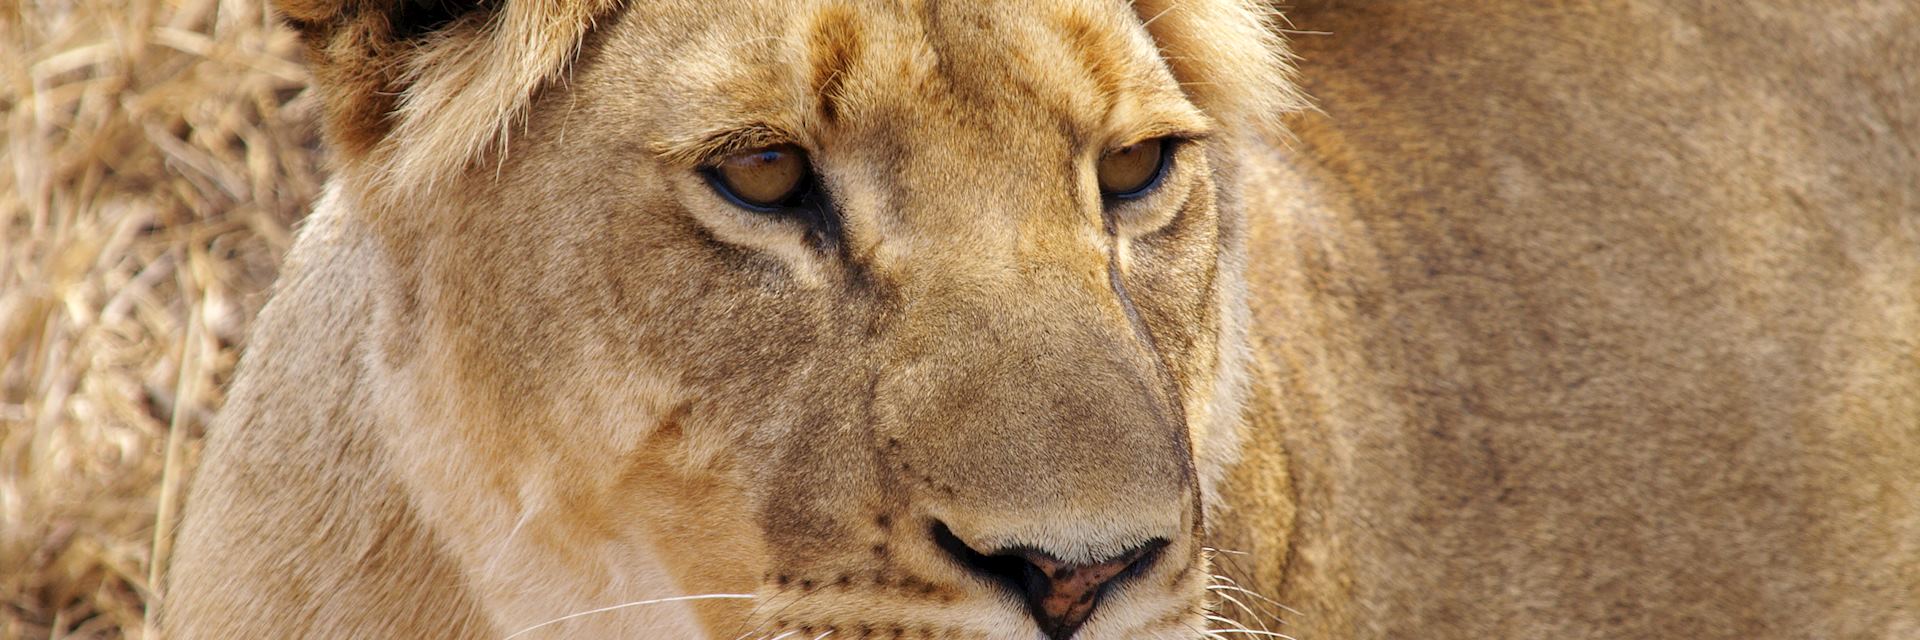 Lioness in Greater Makalali Game Reserve